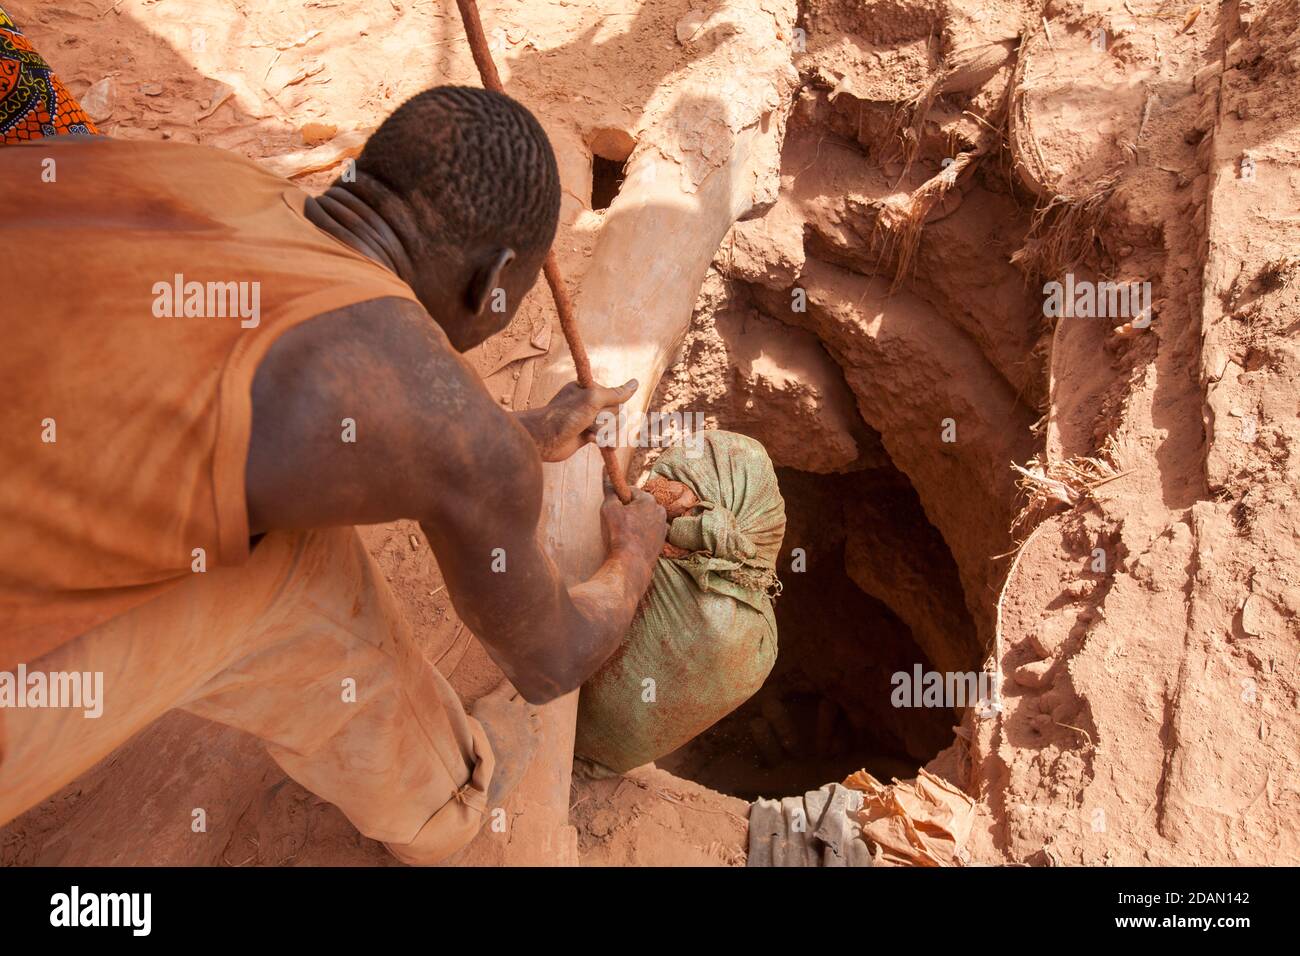 Selingue, Mali, 28th April 2015; Faraba gold mine.  Mamadu Doubia, 22, spent 2 hours 45 minutes mining underground this morning.  The conditions are t Stock Photo